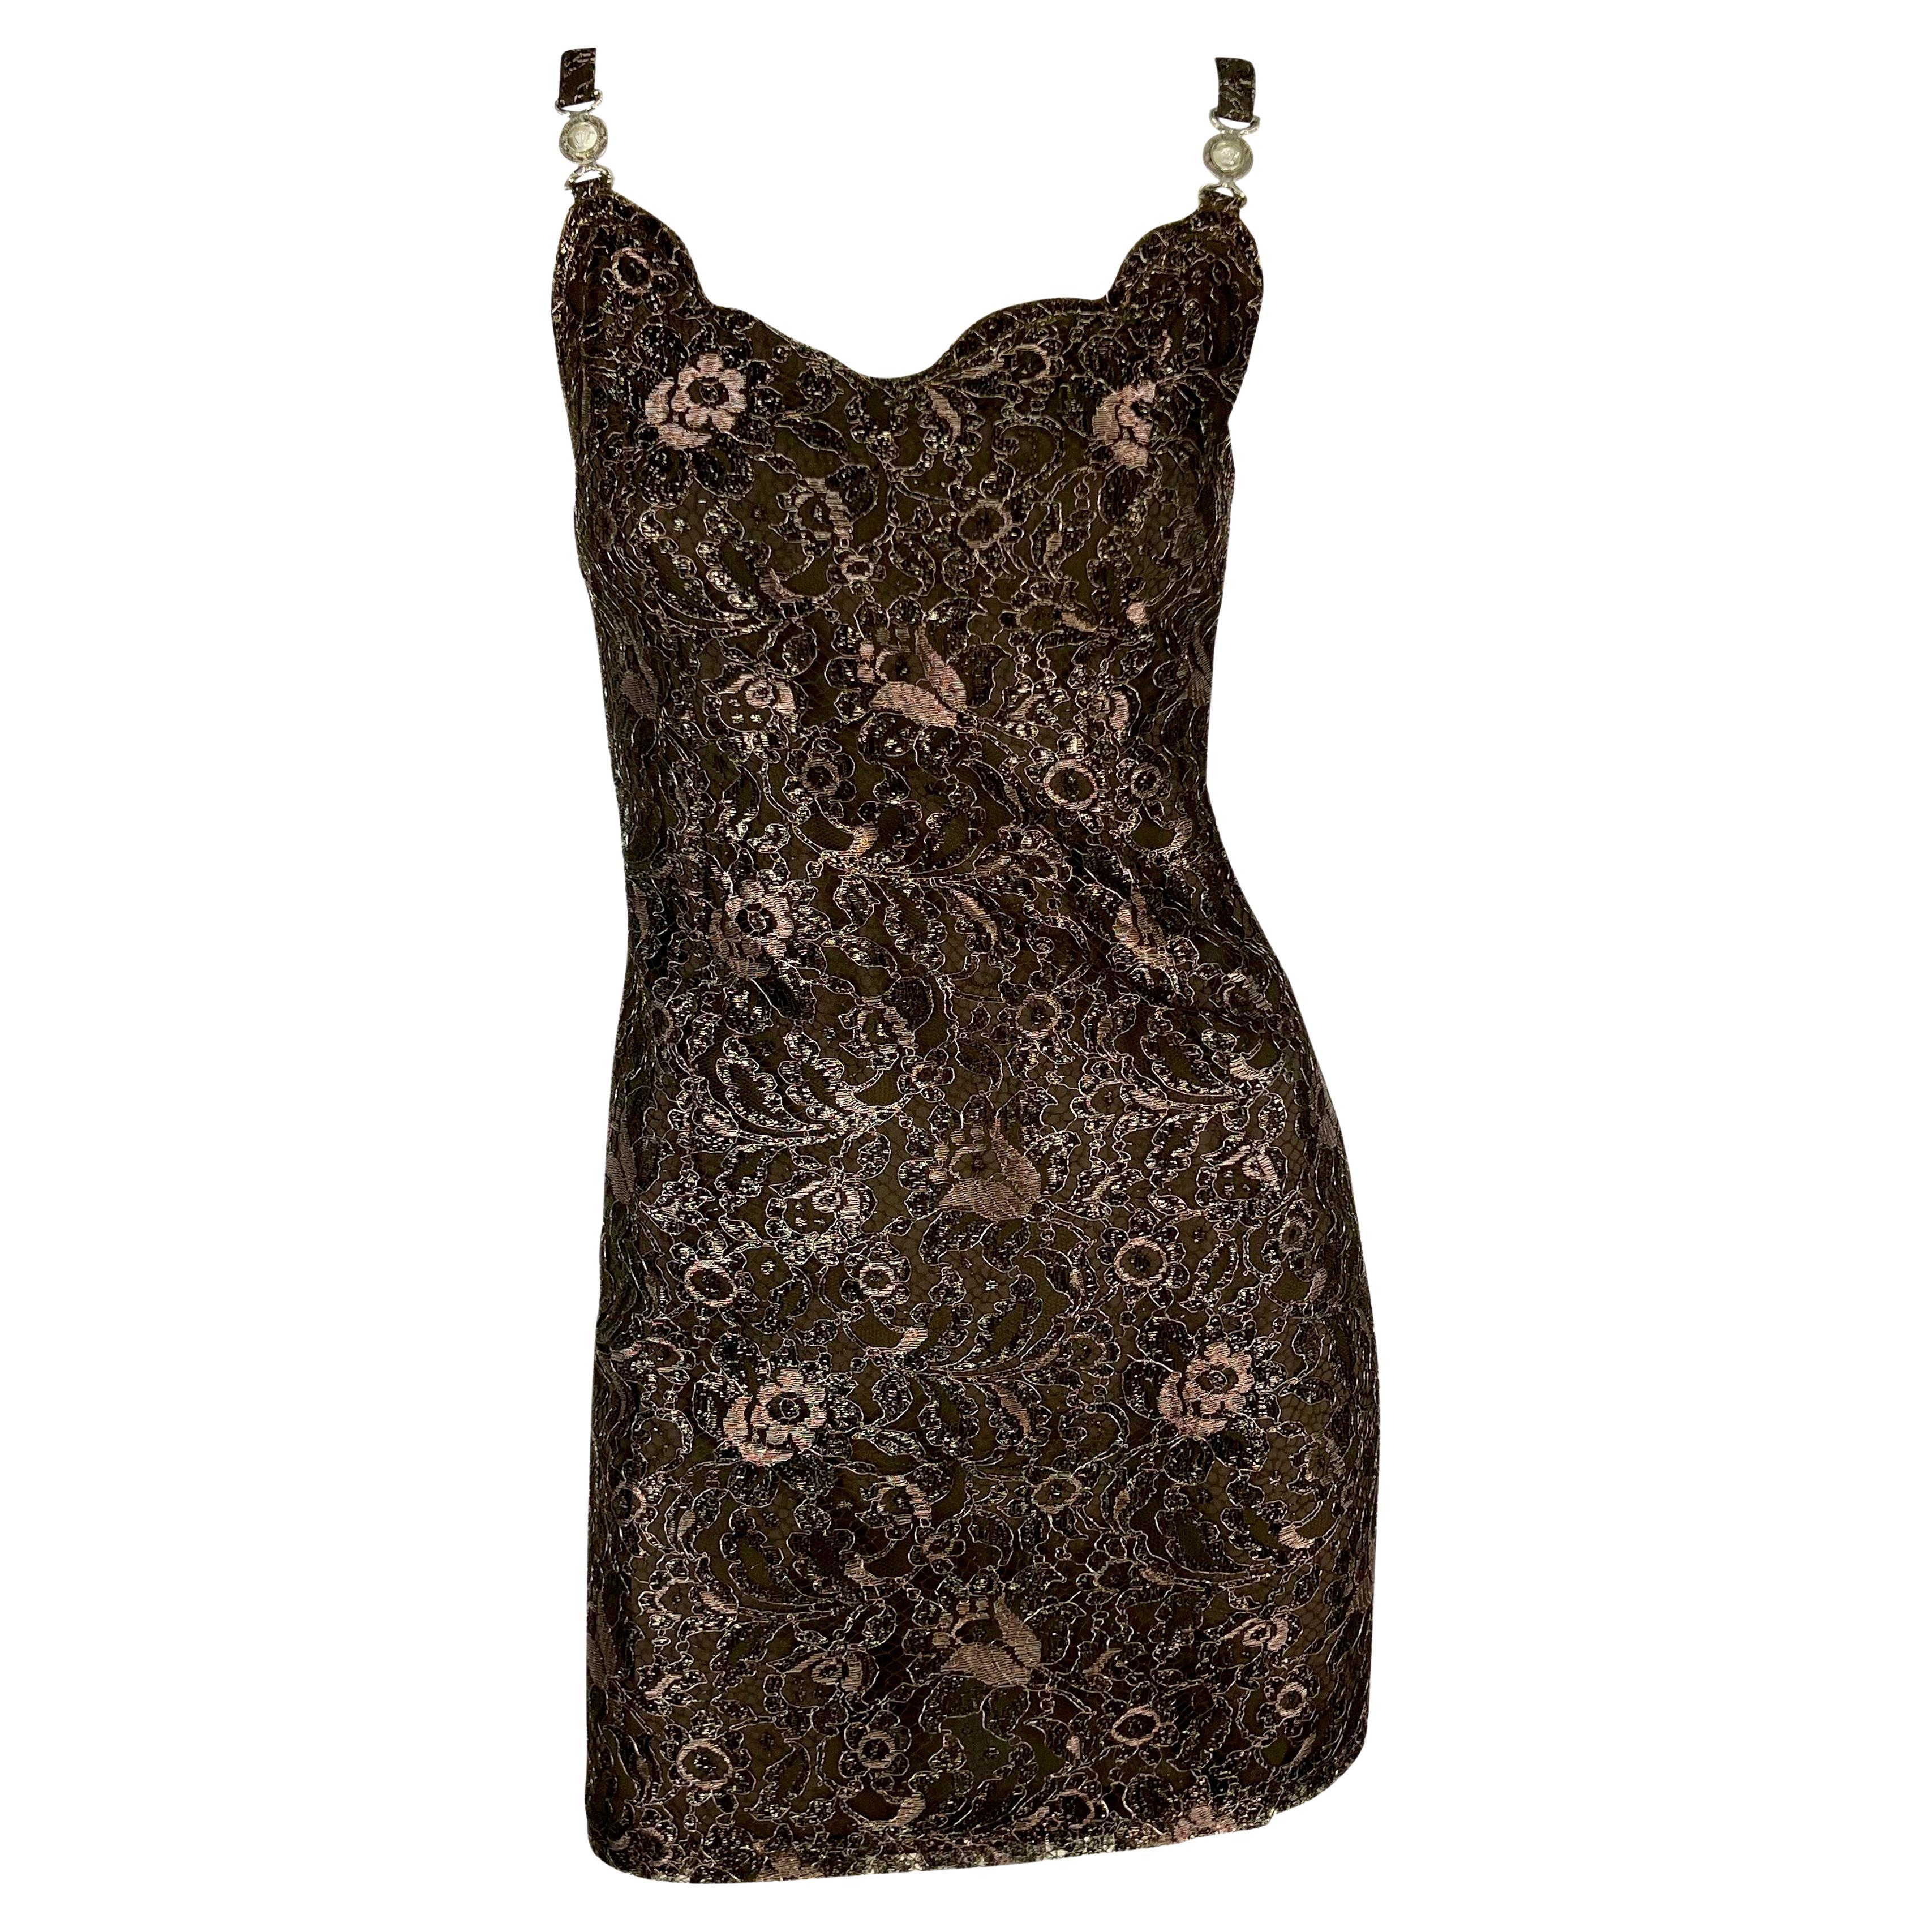 F/W 1996 Gianni Versace Couture Metallic Brown Floral Lace Medusa Mini Dress For Sale